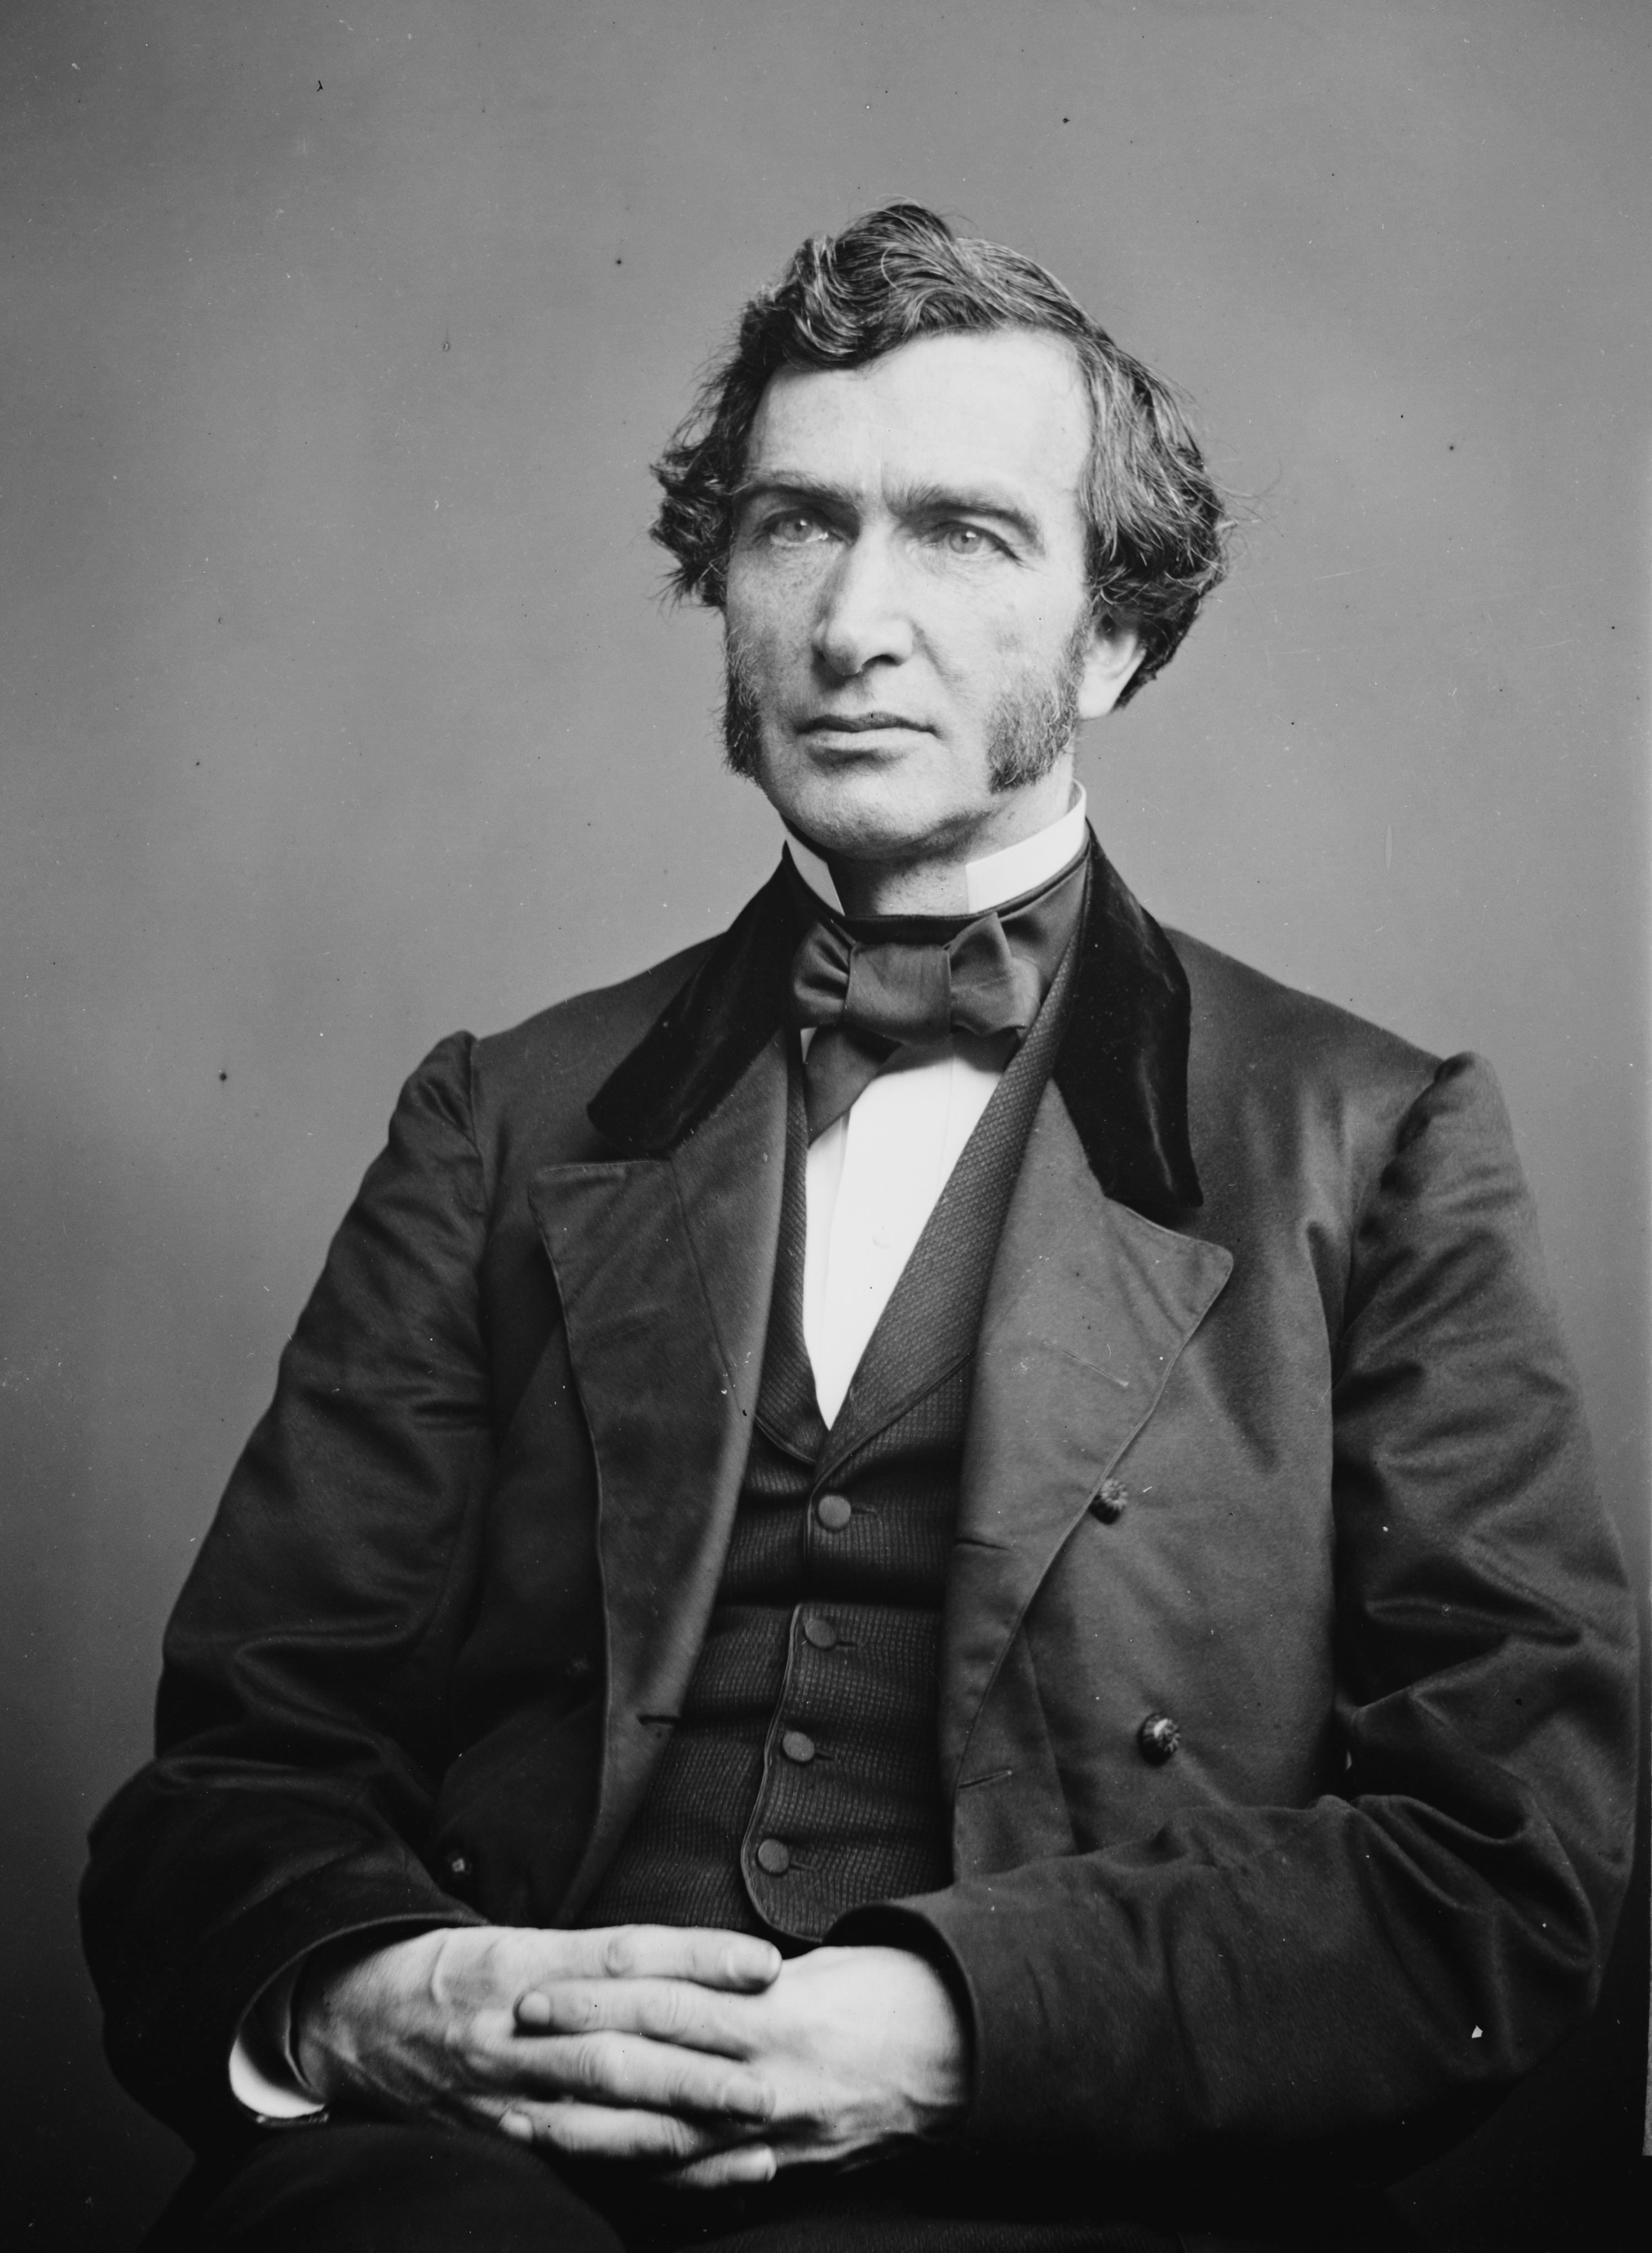 Photograph of Justin Smith Morrill sitting.